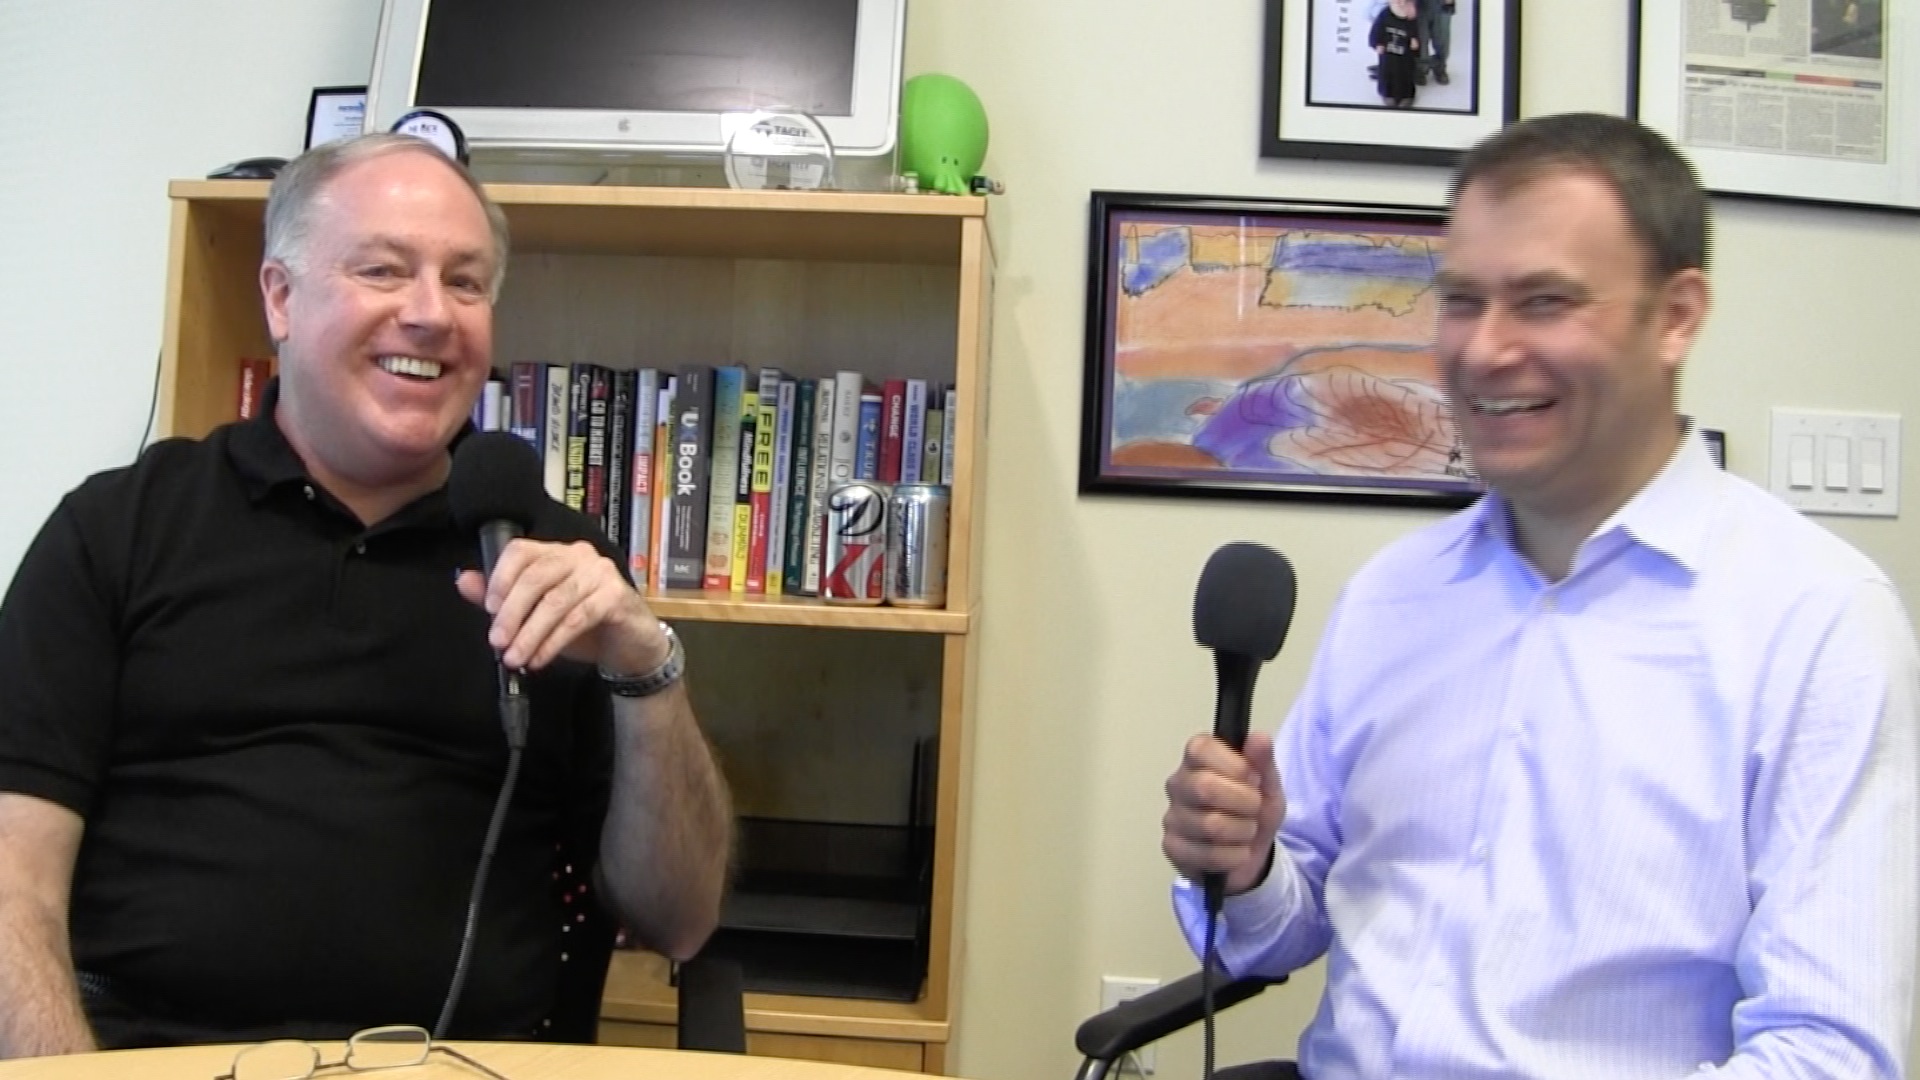 MacVoices #14071: Road to Macworld – Geoff Barrall Talks About The Brand New Drobo